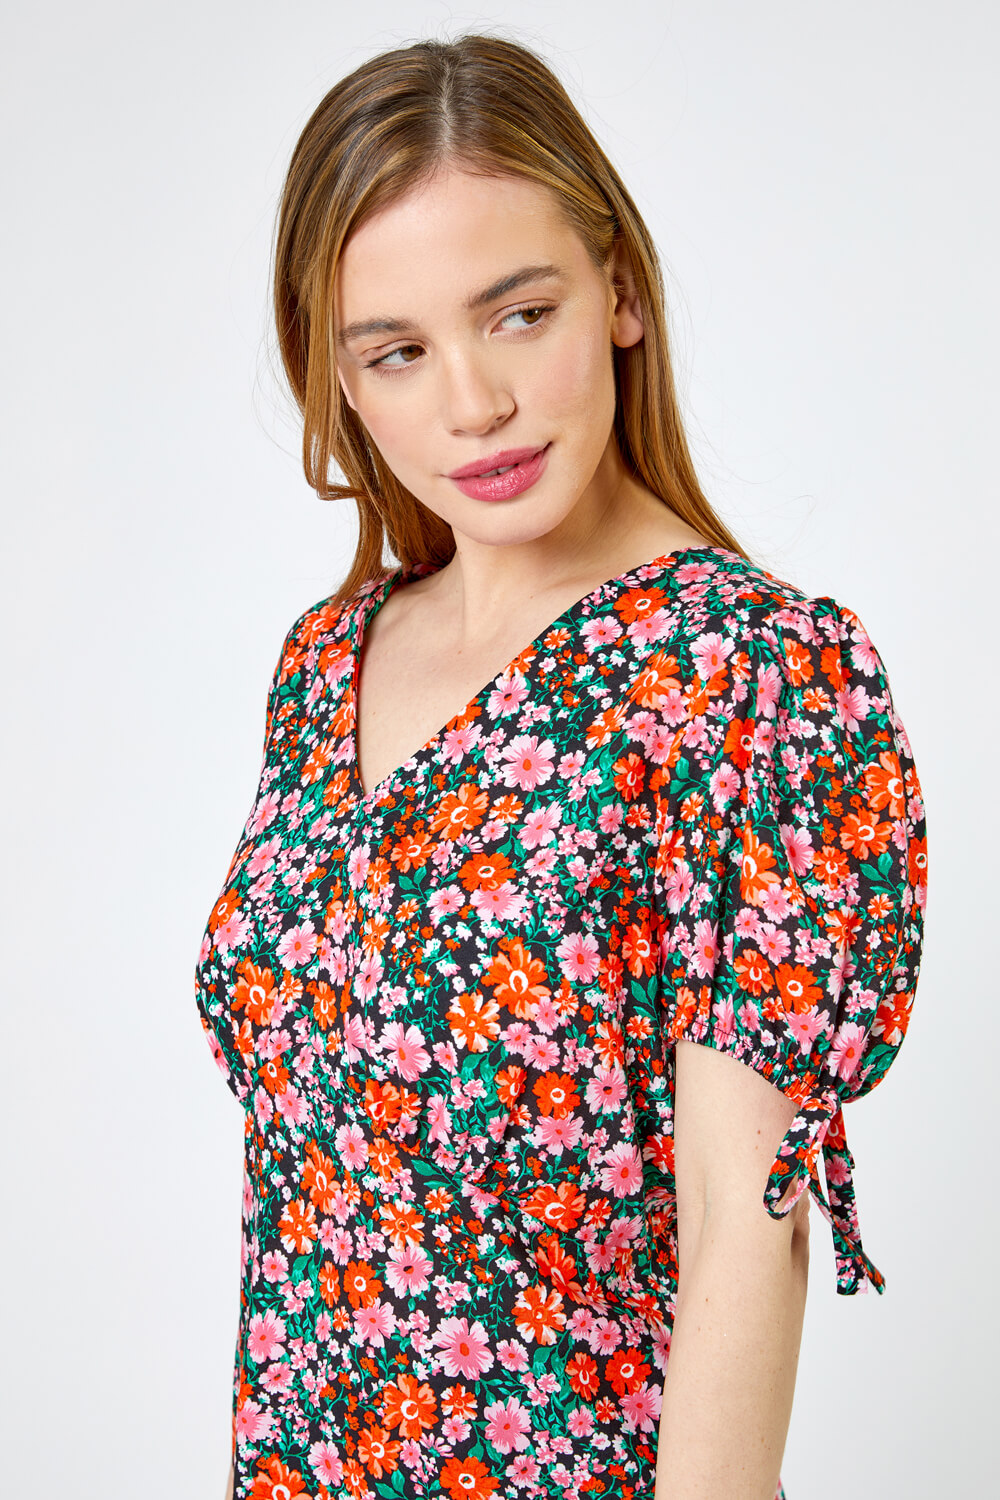 Red Petite Floral Print V Neck Top, Image 4 of 4